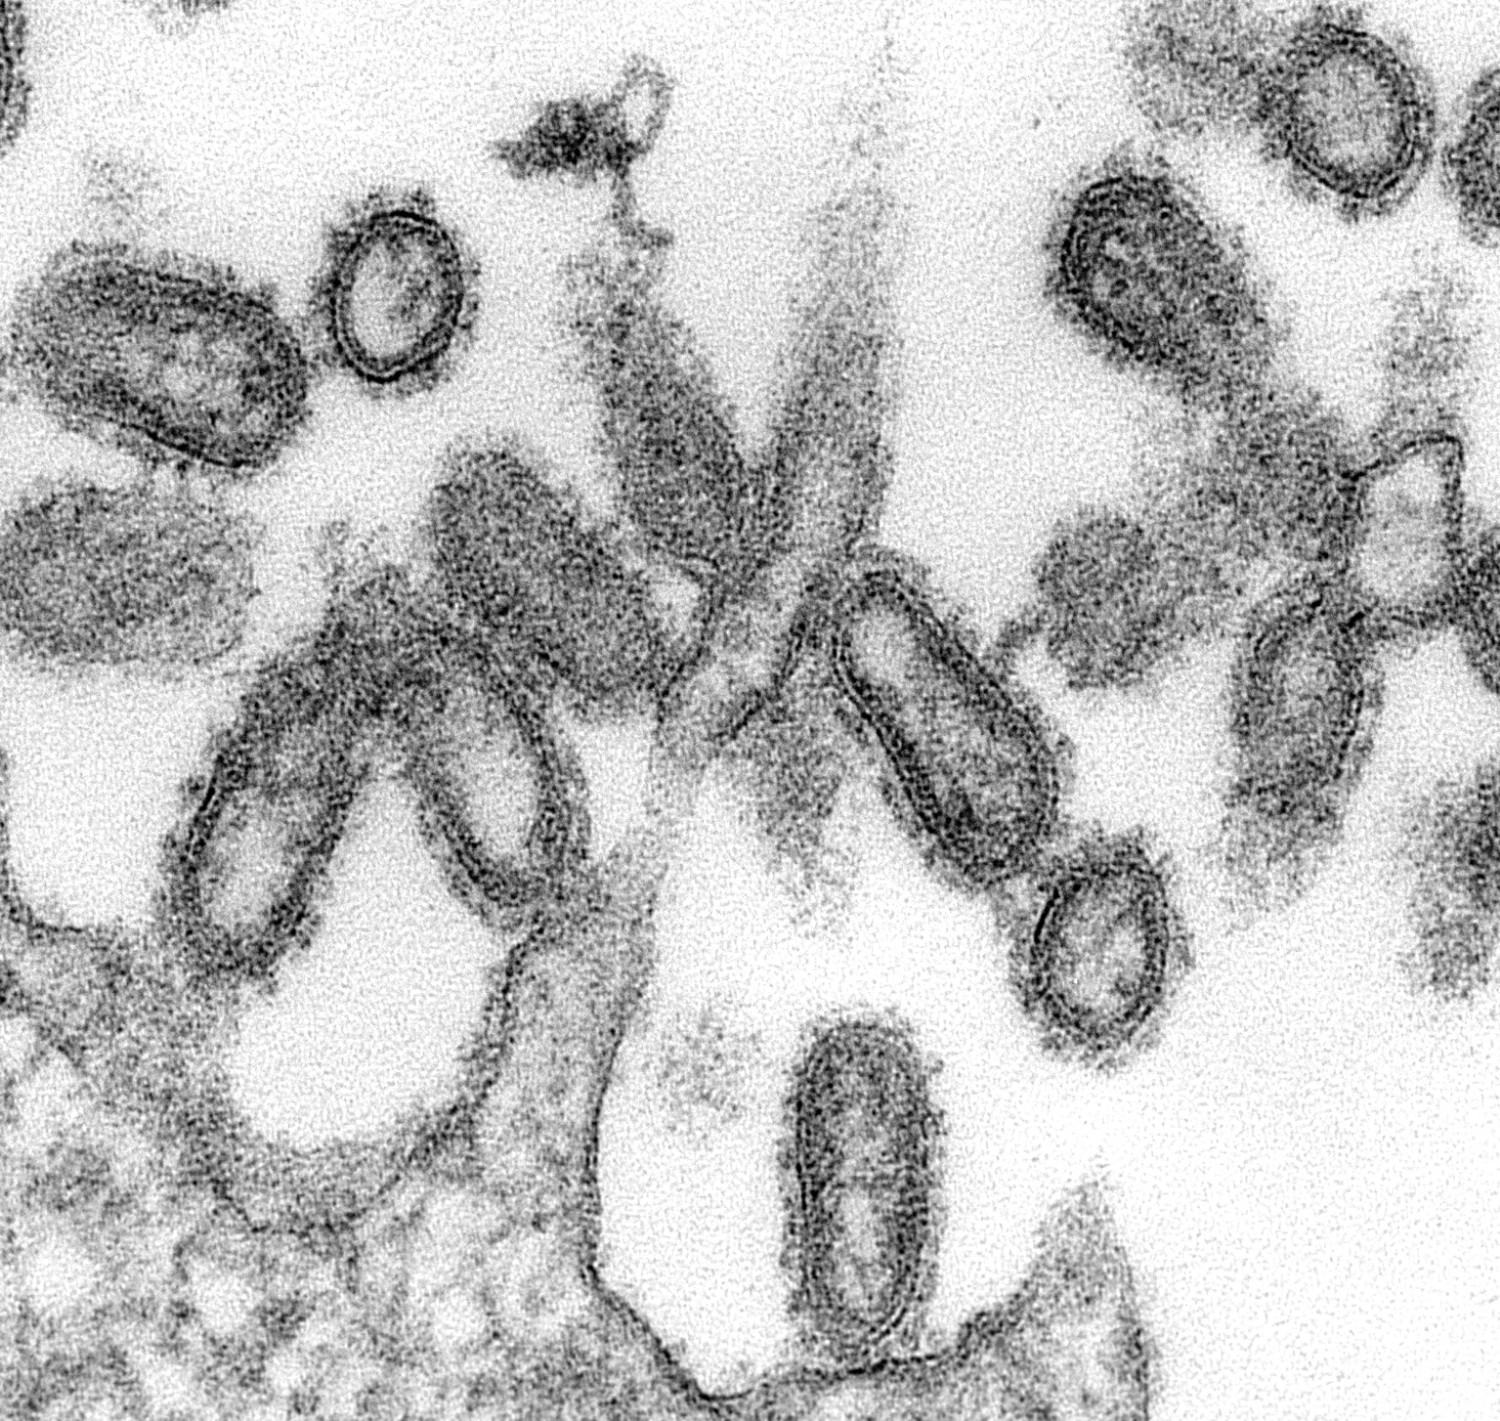 a black and white electron microscope image of viruses that are oval shaped and have fuzzy rods sticking out from the edges